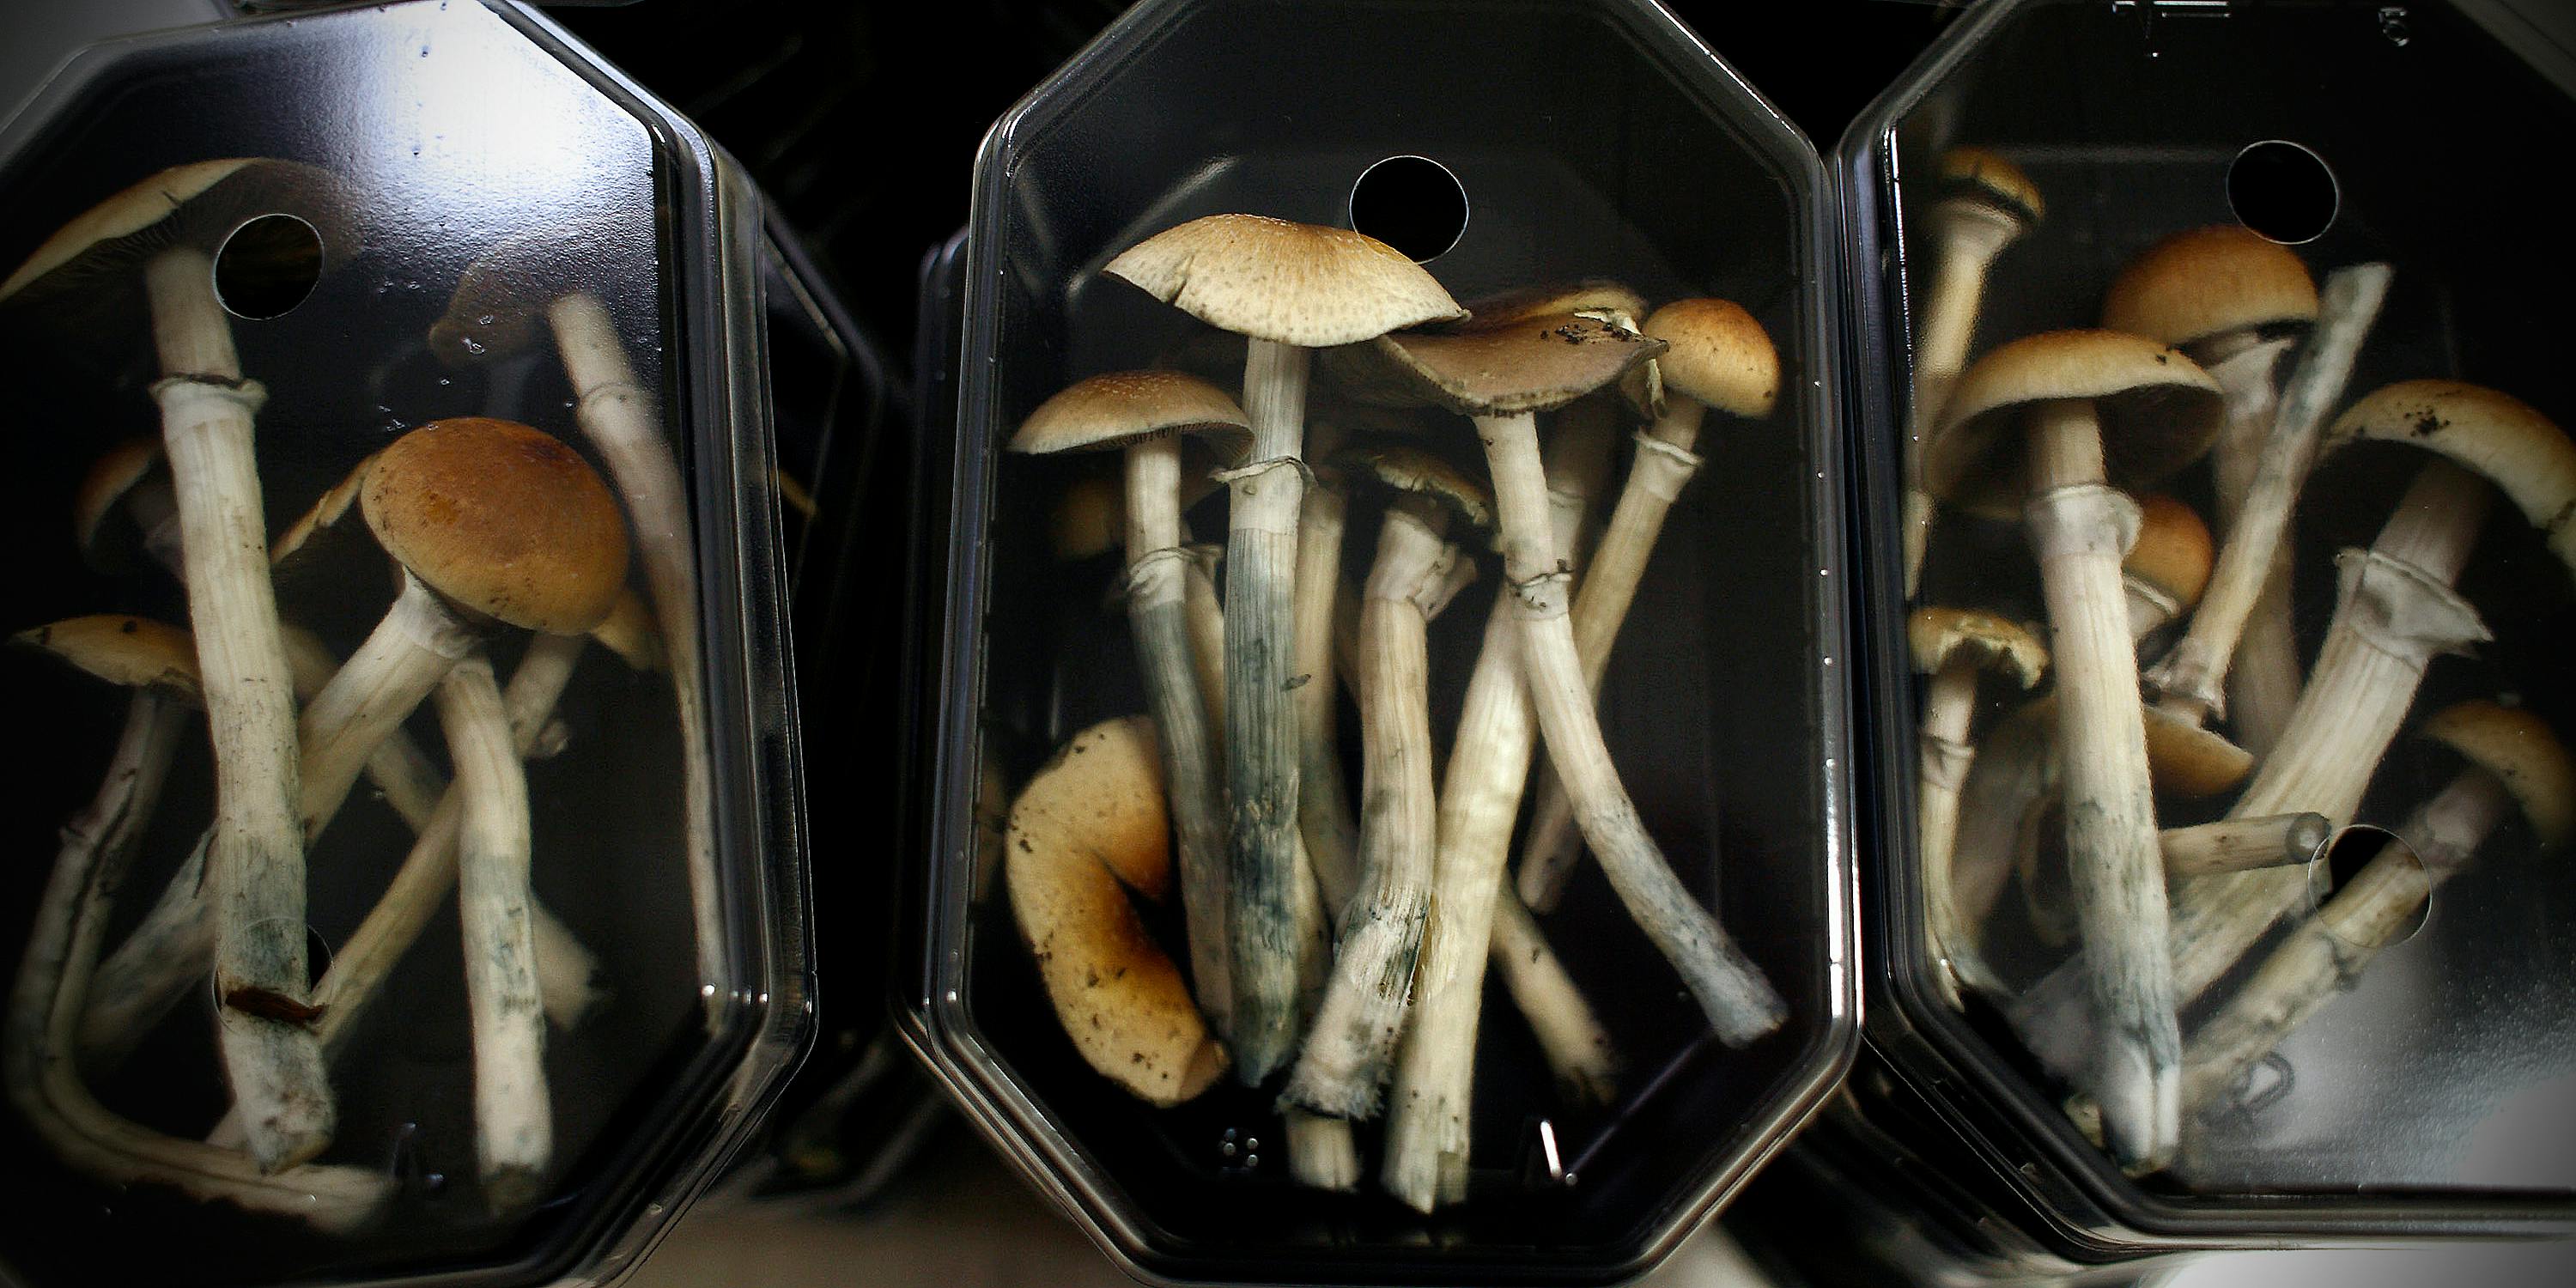 Will Psychedelics Go Corporate Like Cannabis?